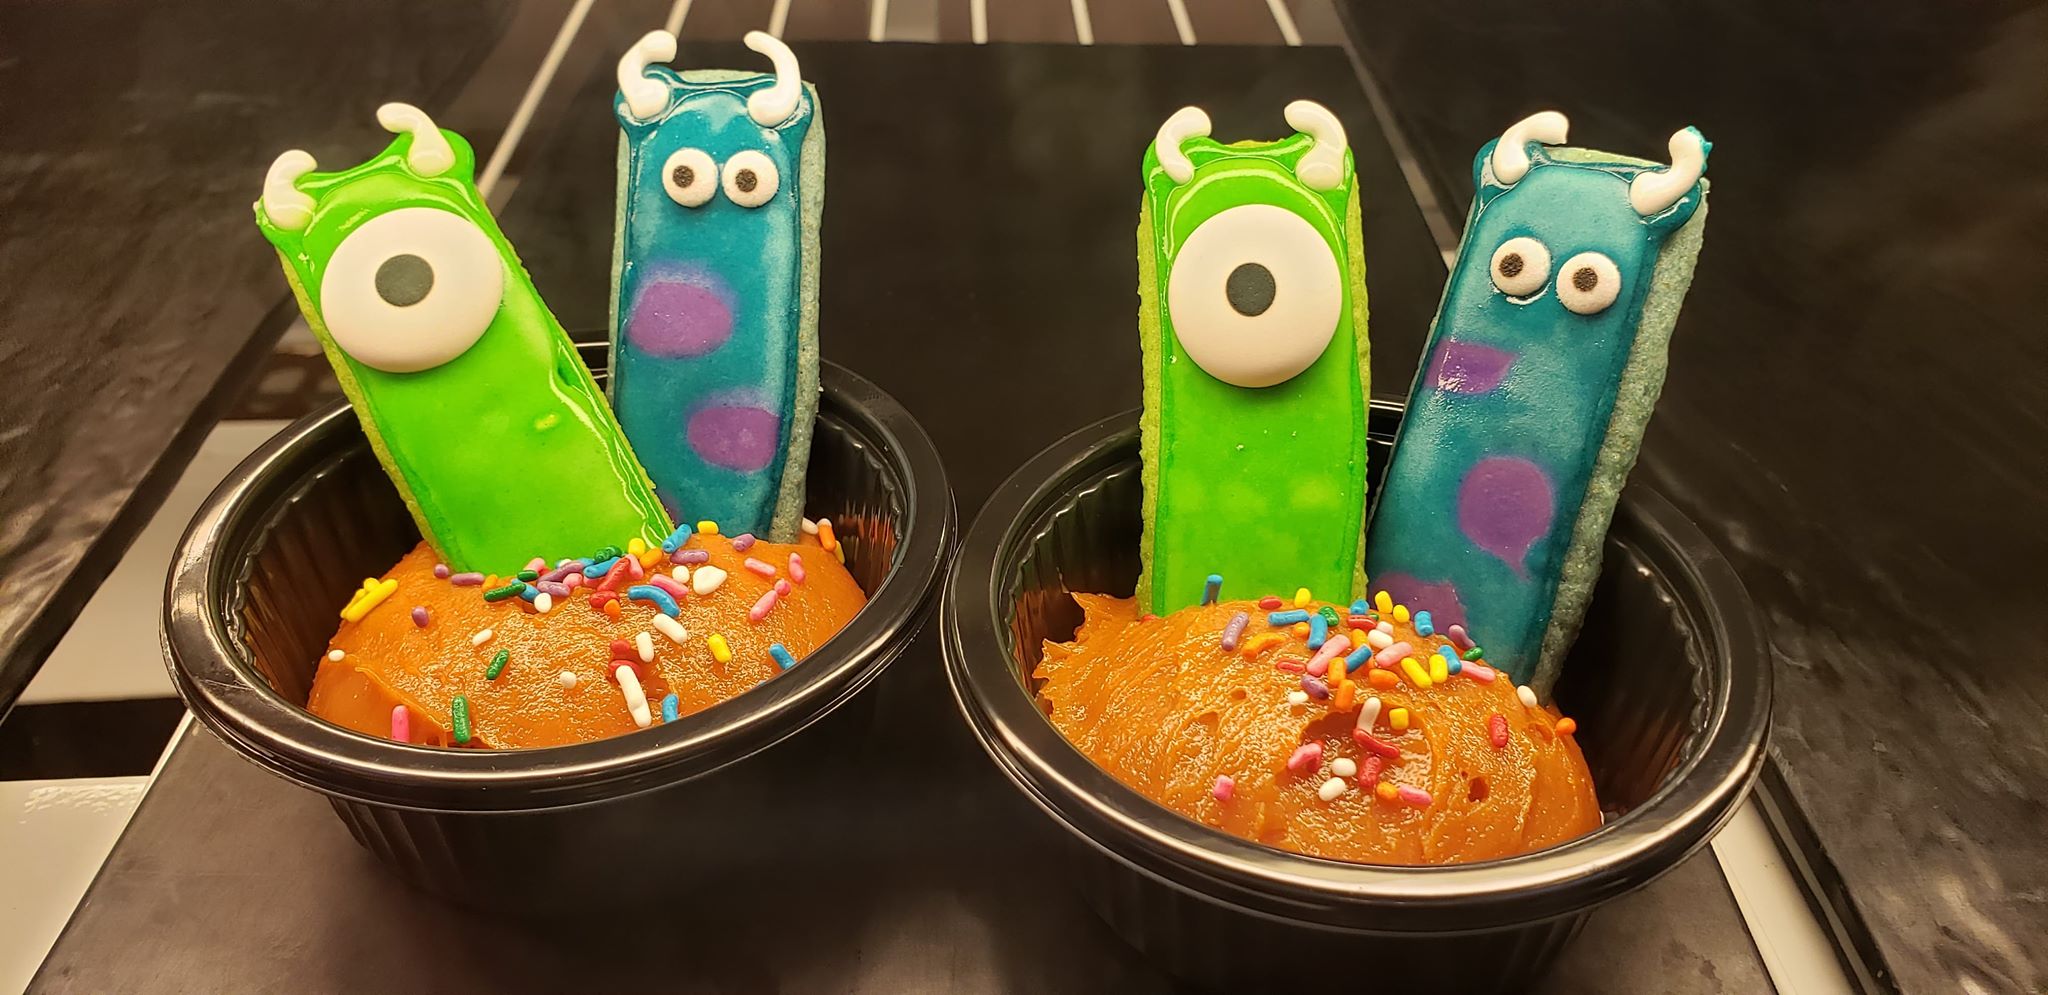 NEW Mike And Sulley Cookie Butter Is A SCREAM!!